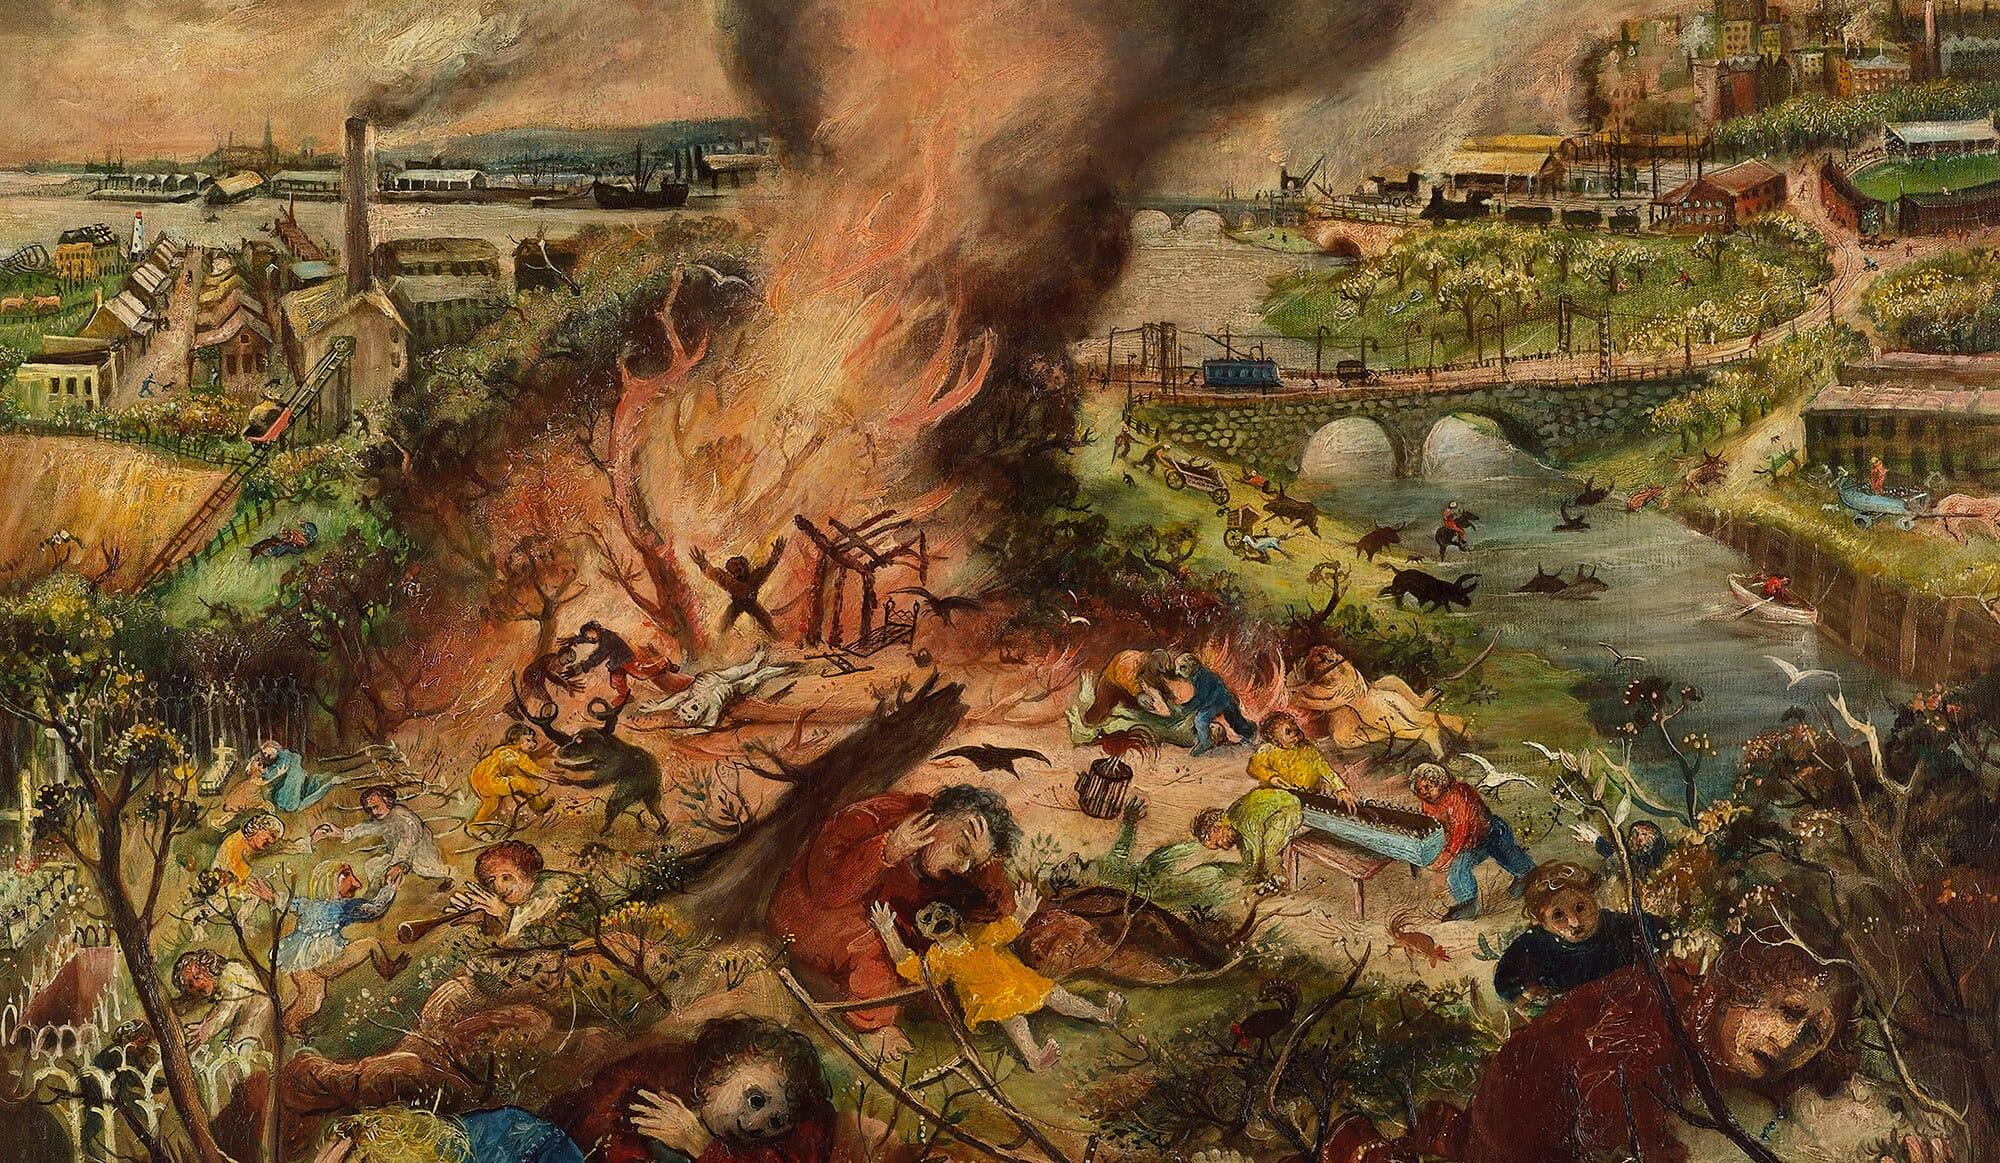 An illustrated apocalyptic scene featuring fire, hunched bodies, wailing, set by a river.